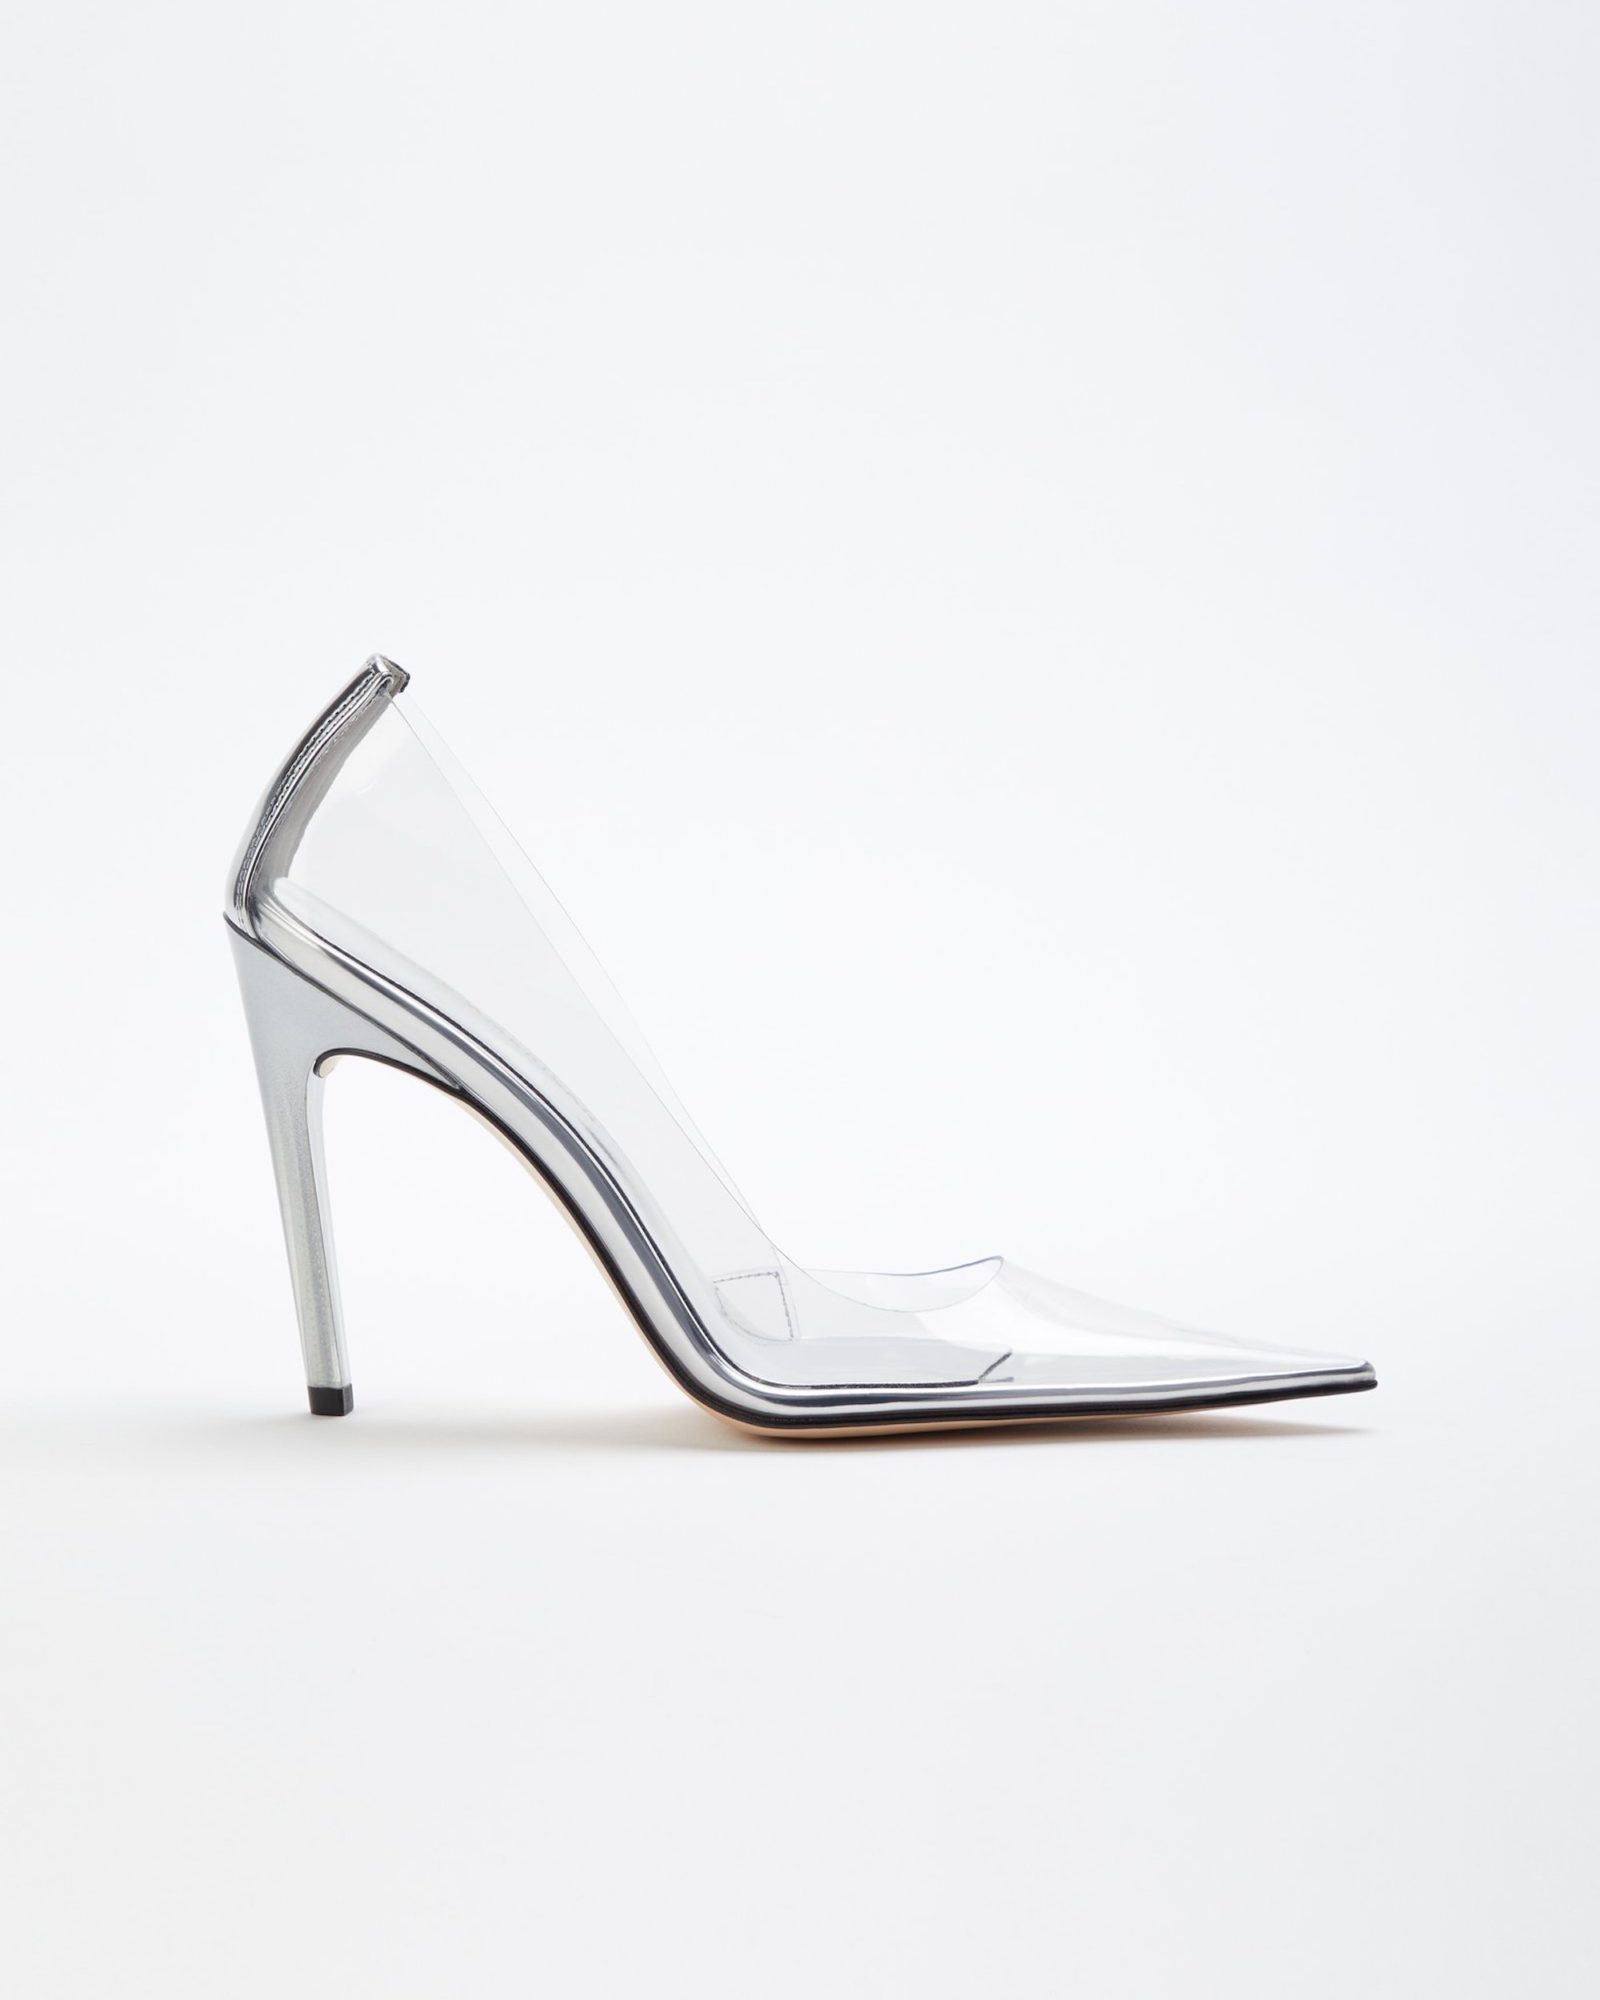 Clear Heels 2021: Modern Glass Slippers for Channeling Cinderella ...